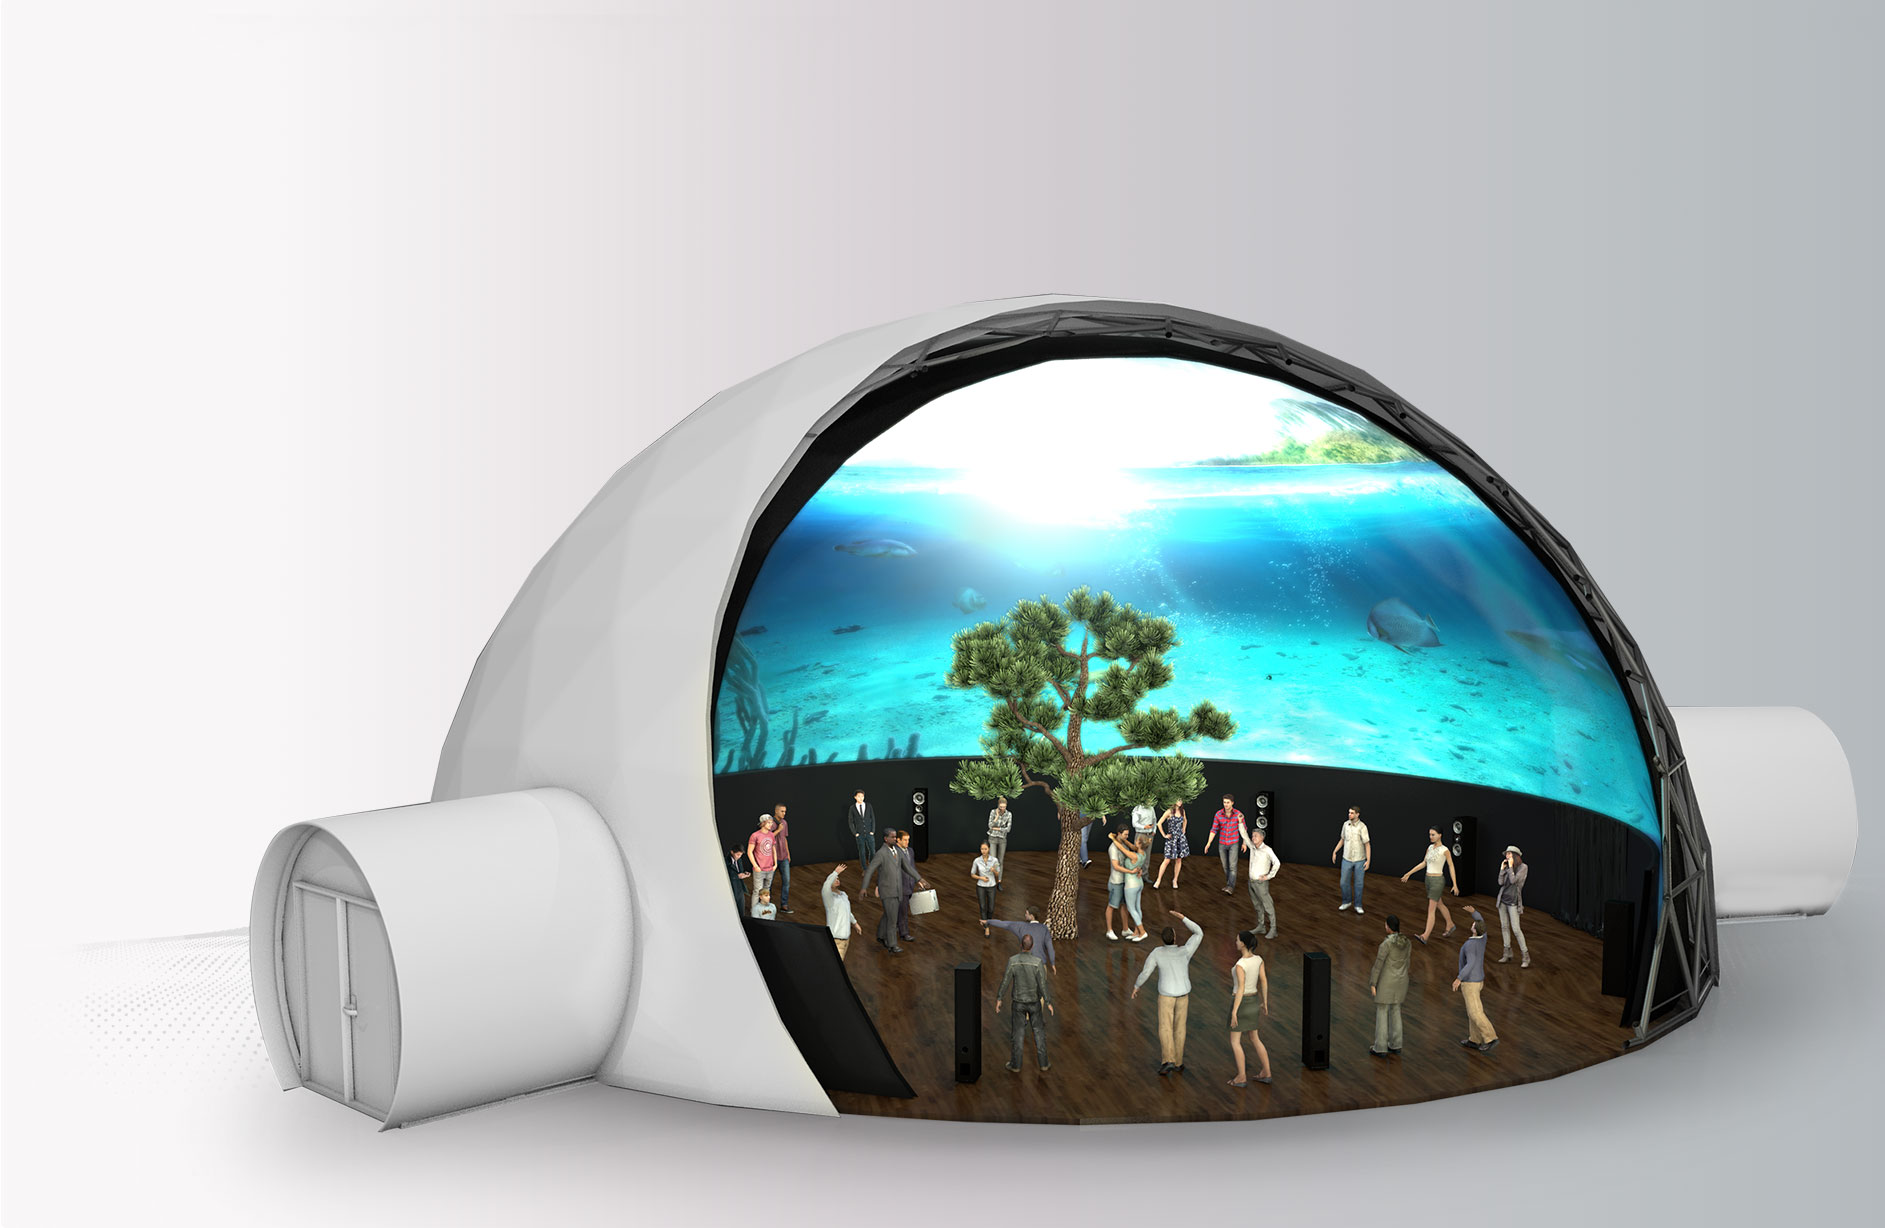 Fulldome 360 Immersive Dome - people in a geodesic projection dome